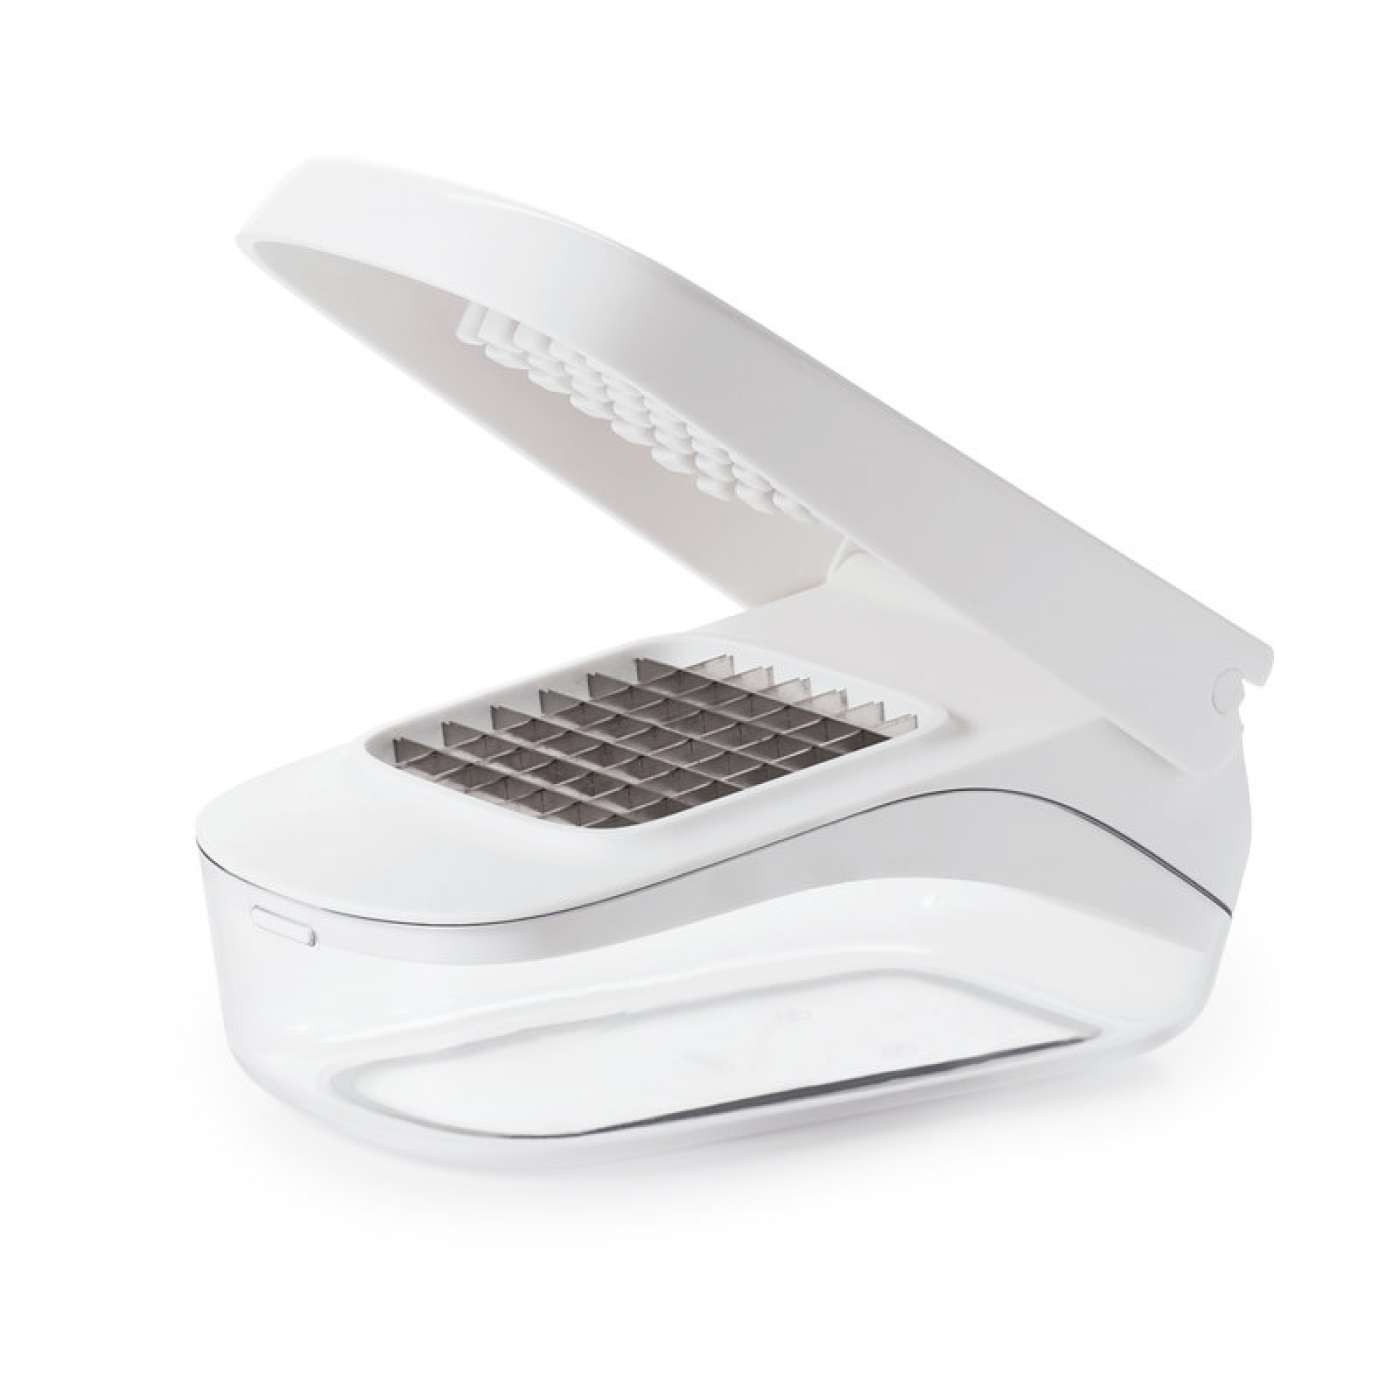 https://www.thepeppermillinc.com/wp-content/uploads/2020/03/11122600_oxo_vegetable_chopper_with_easy_pour_opening.jpg